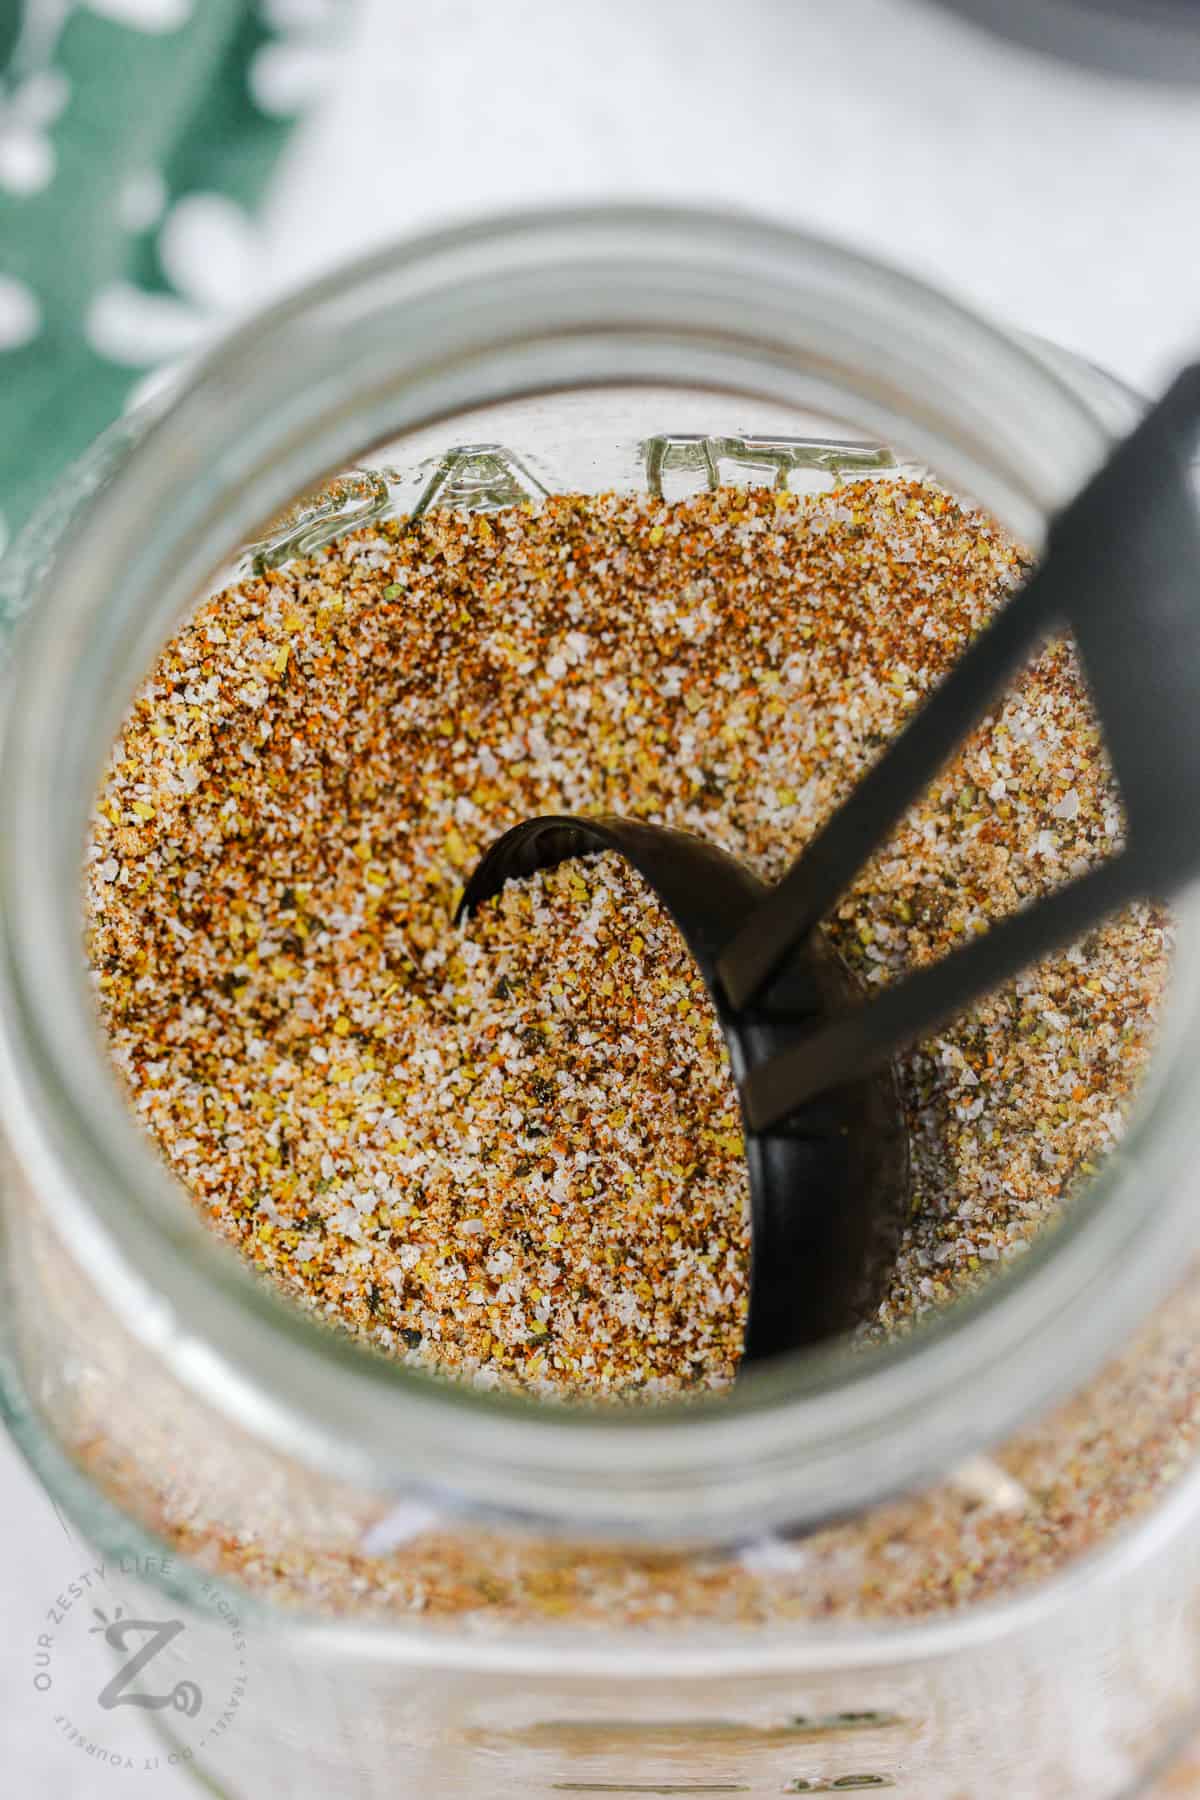 jar of Smoked Chicken Rub with a spoon